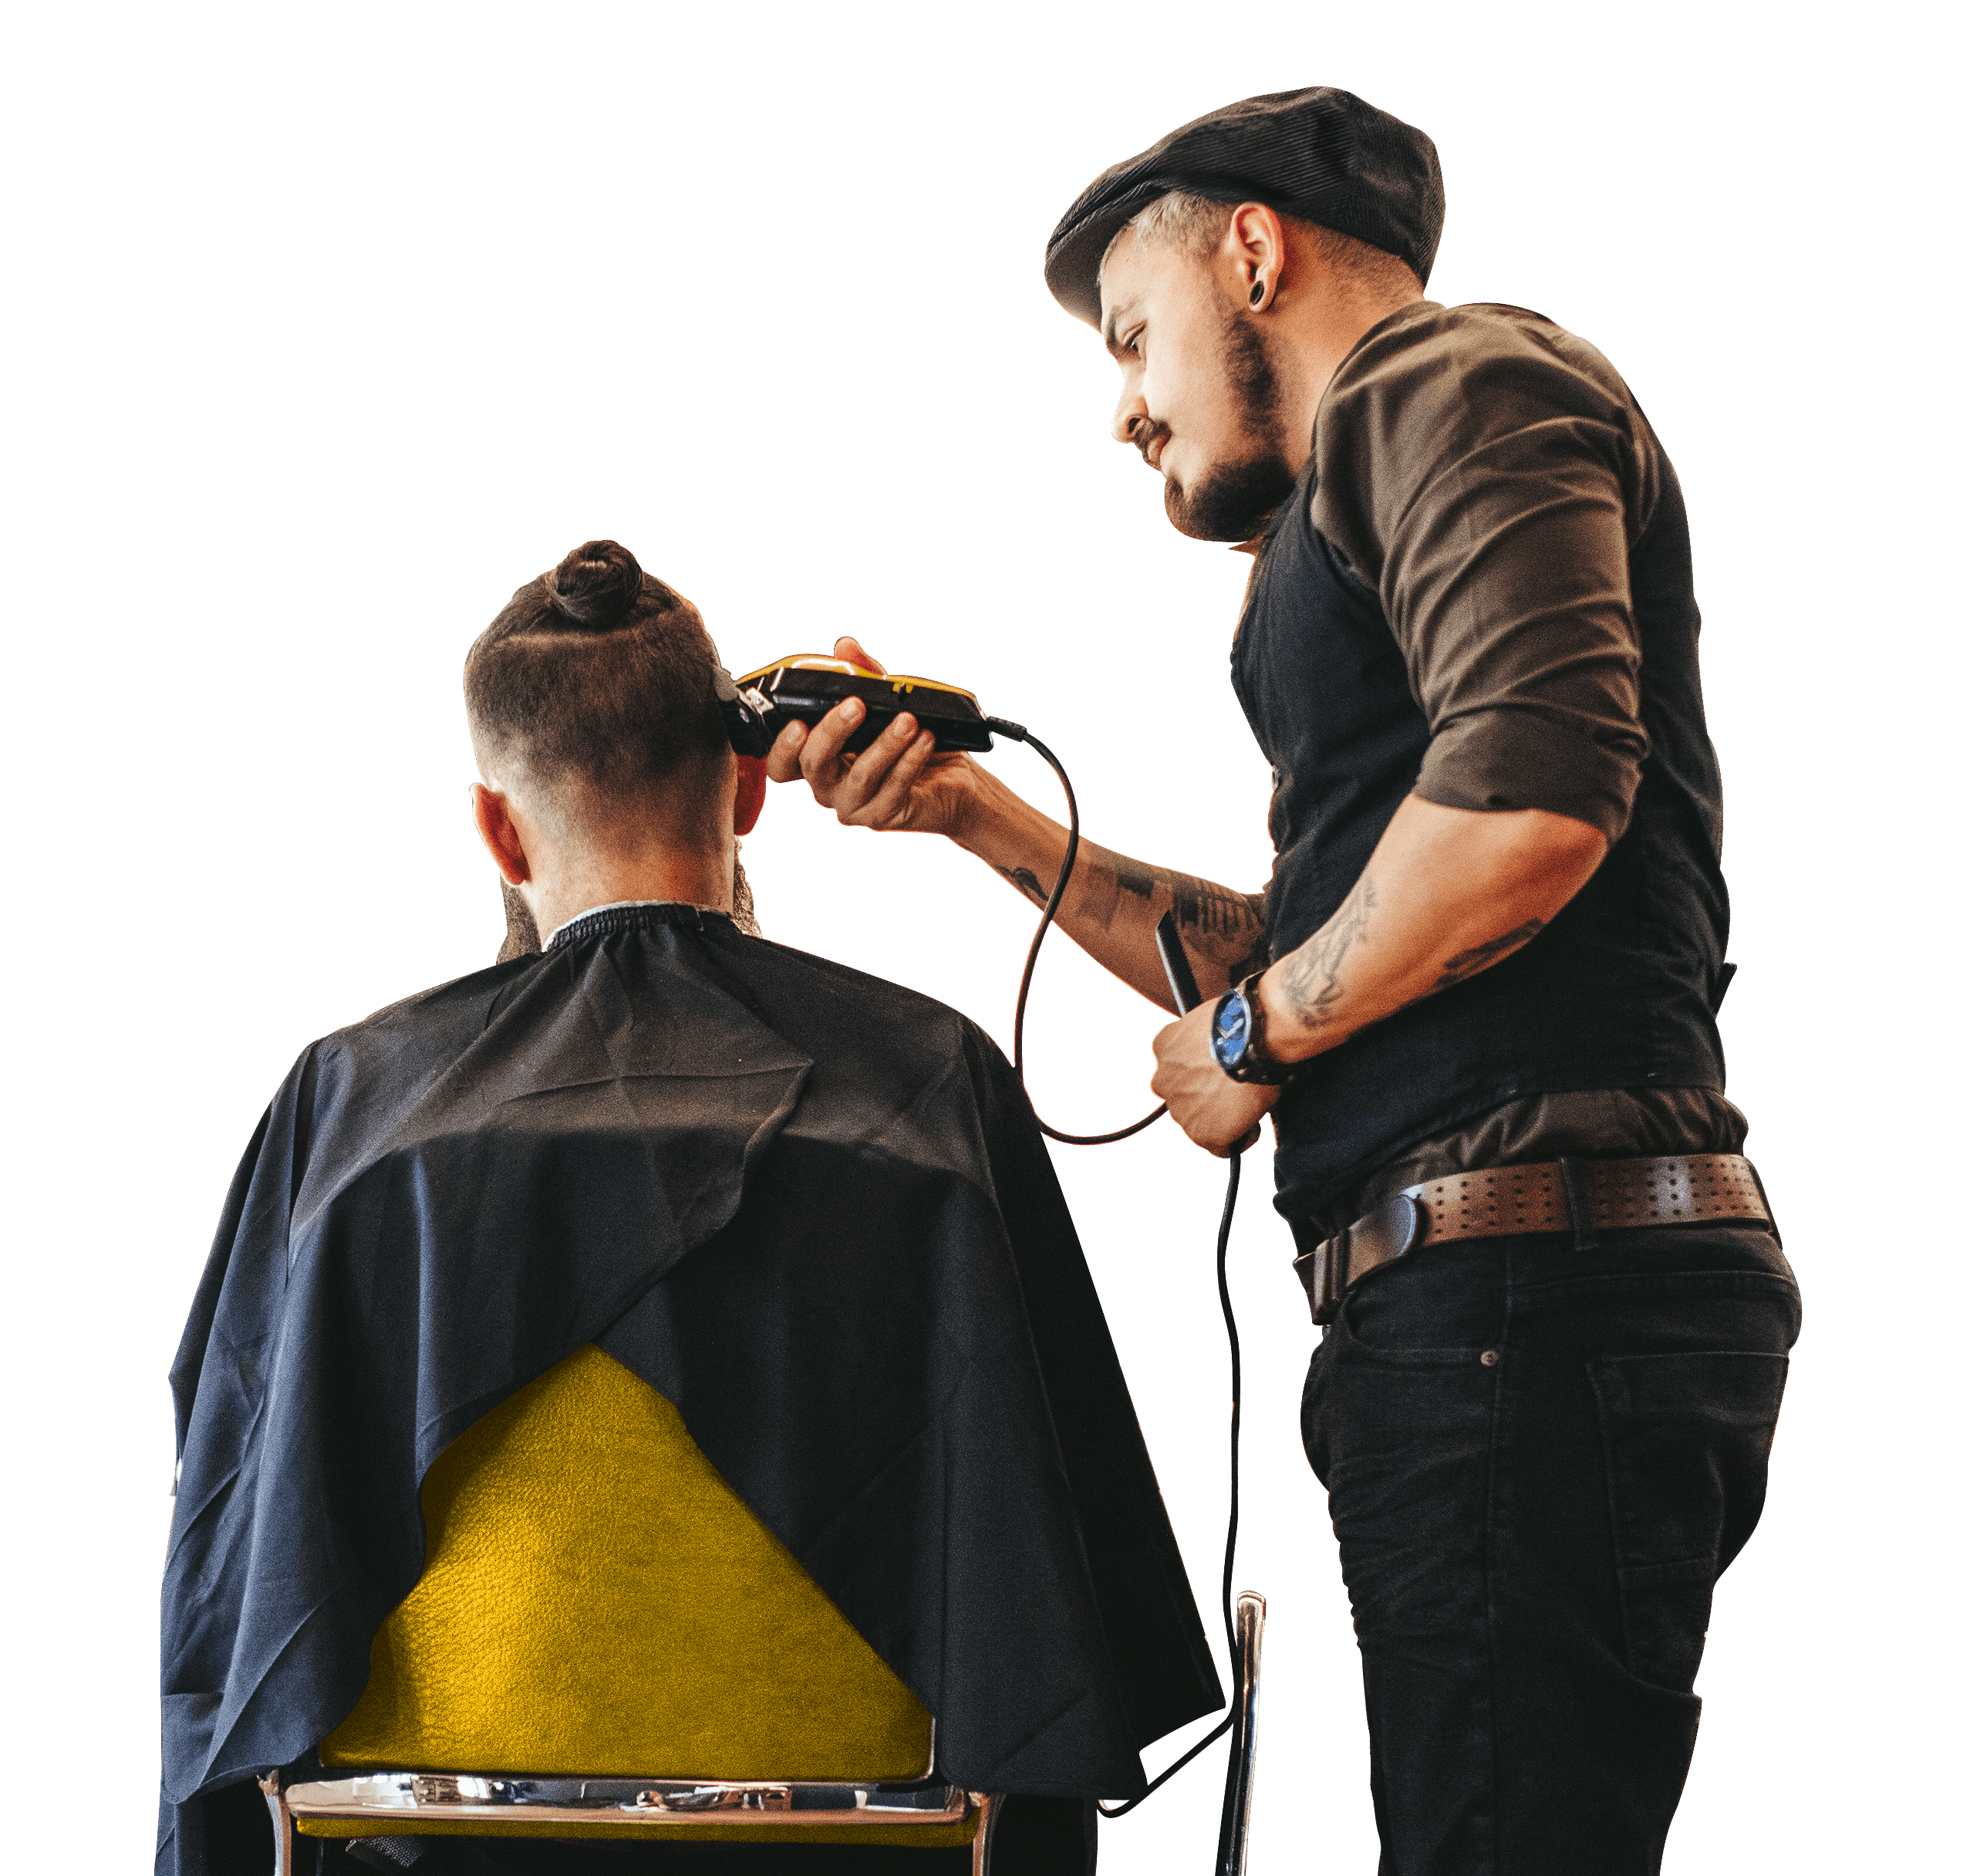 local barber small business cutting client's hair